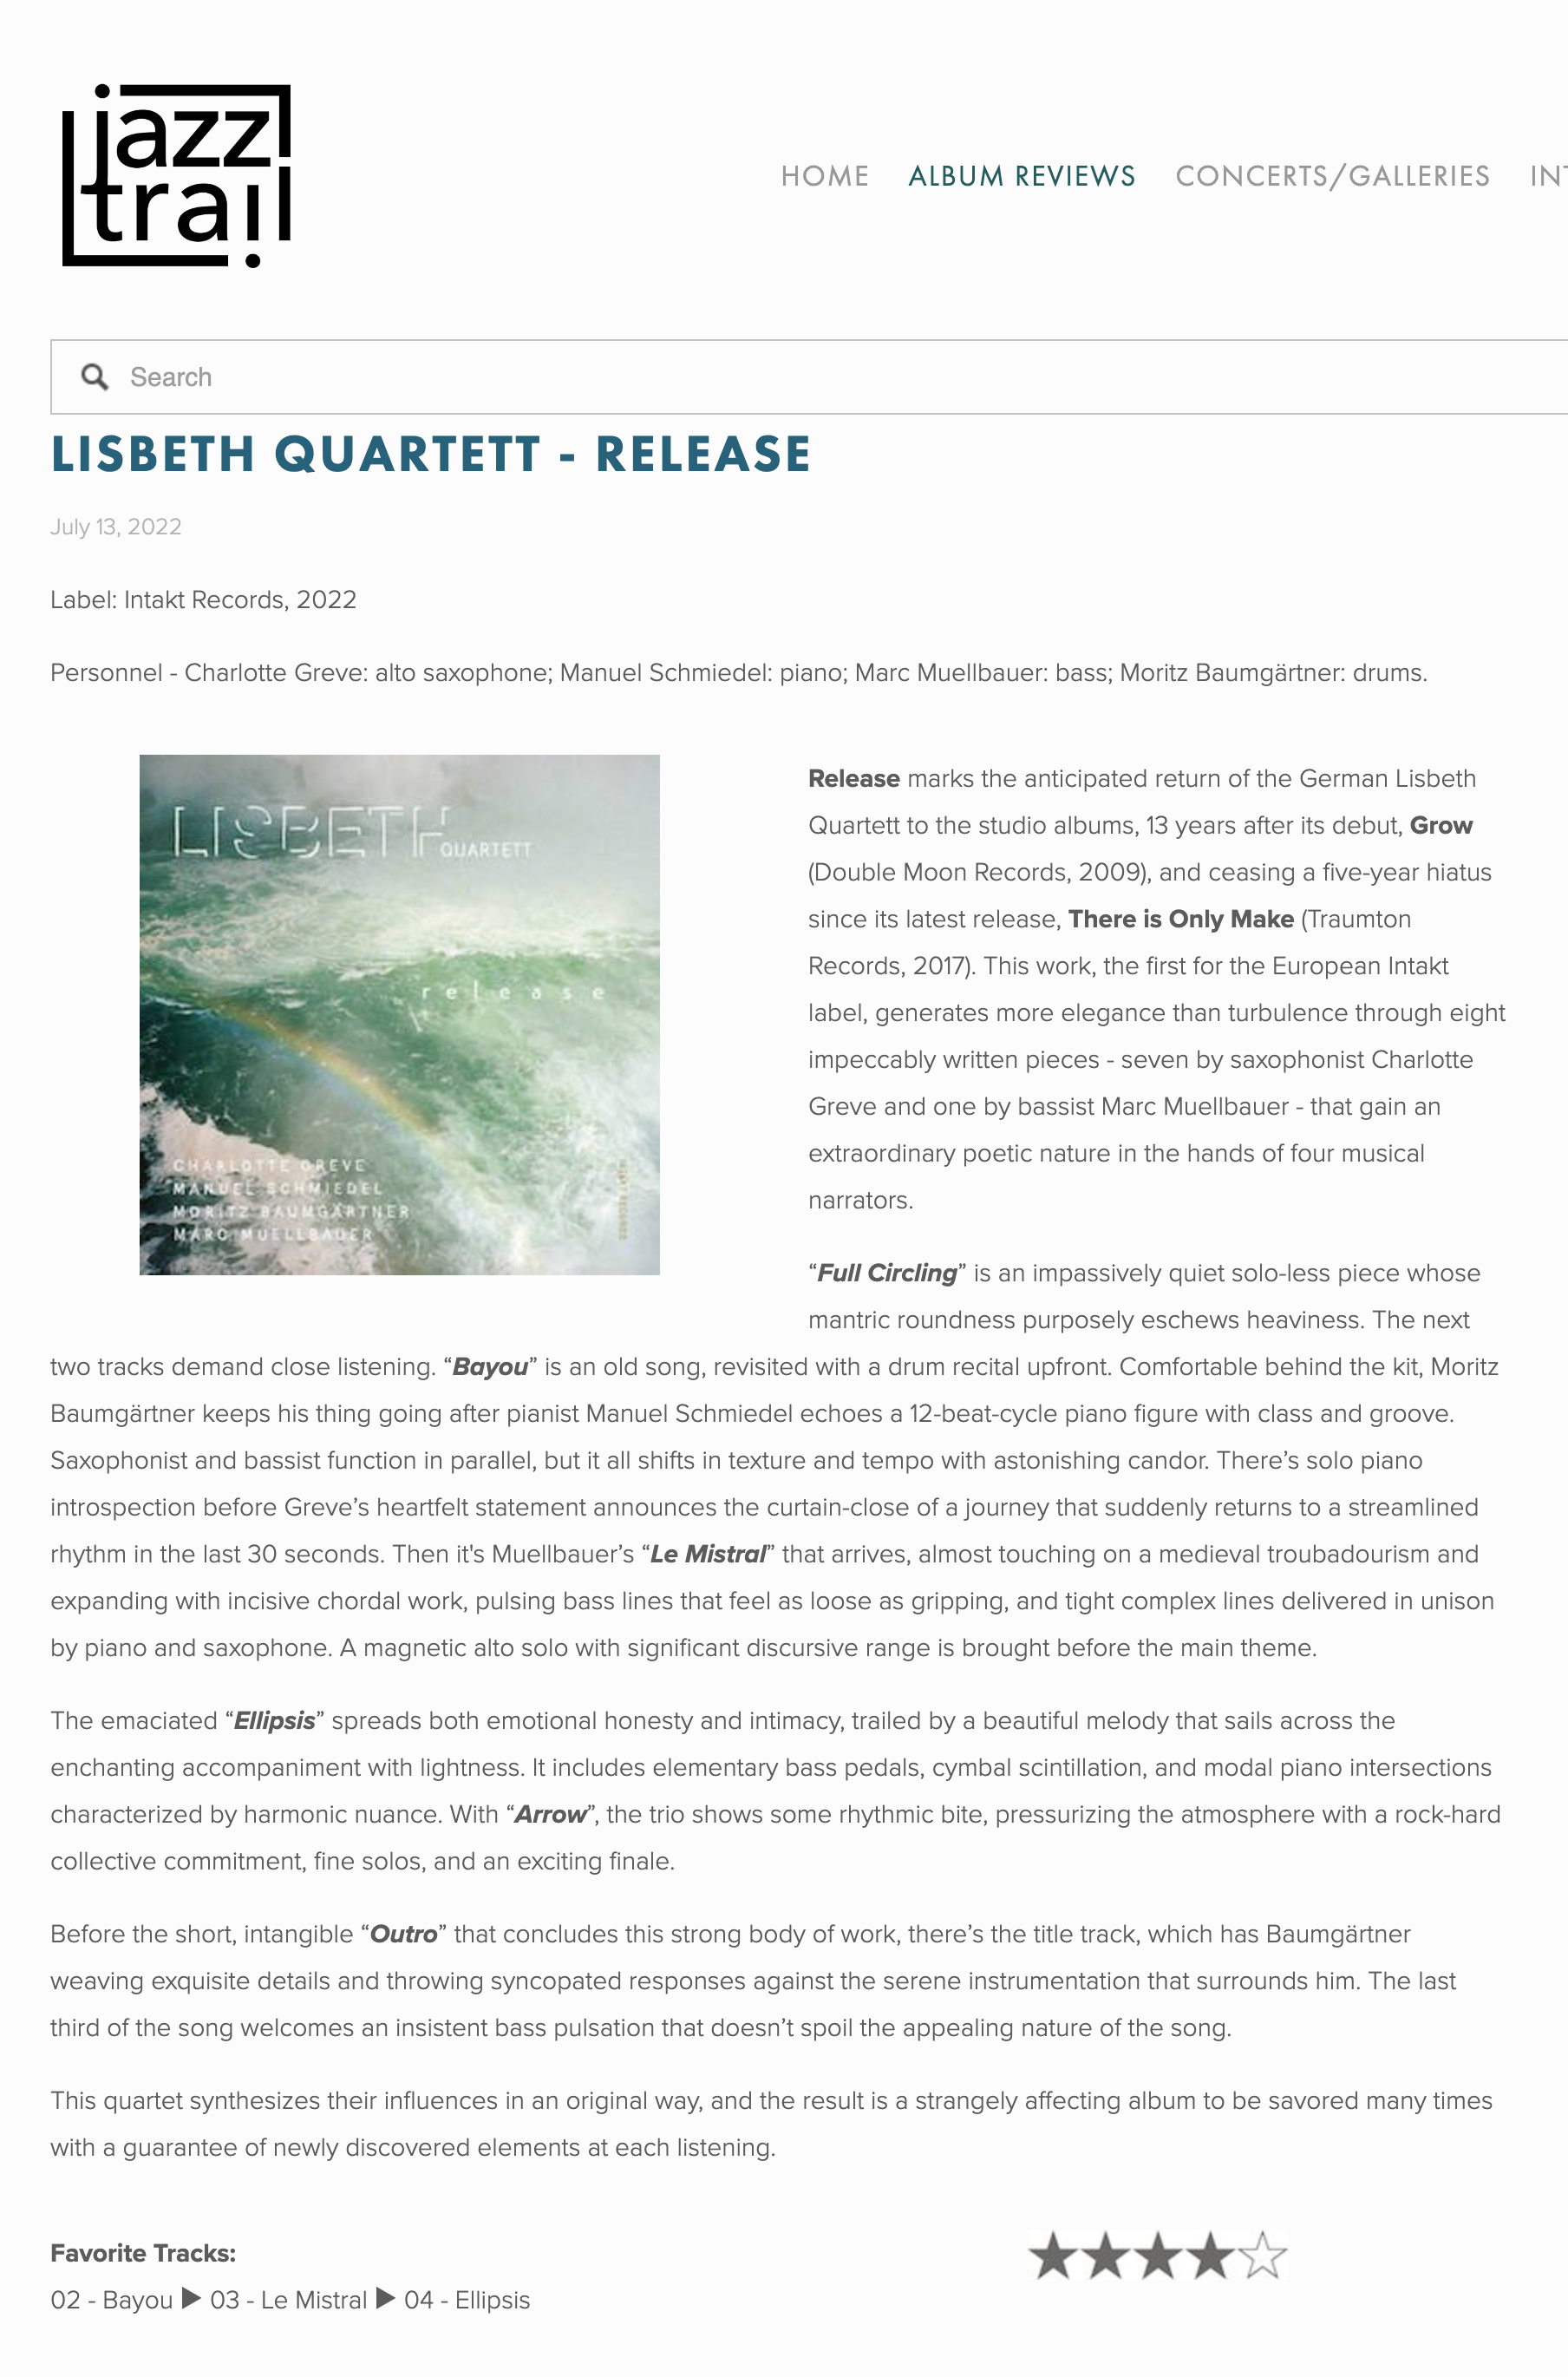 Release marks the anticipated return of the German Lisbeth Quartett to the studio albums, 13 years after its debut, Grow (Double Moon Records, 2009), and ceasing a five-year hiatus since its latest release, There is Only Make (Traumton Records, 2017). This work, the first for the European Intakt label, generates more elegance than turbulence through eight impeccably written pieces - seven by saxophonist Charlotte Greve and one by bassist Marc Muellbauer - that gain an extraordinary poetic nature in the hands of four musical narrators.